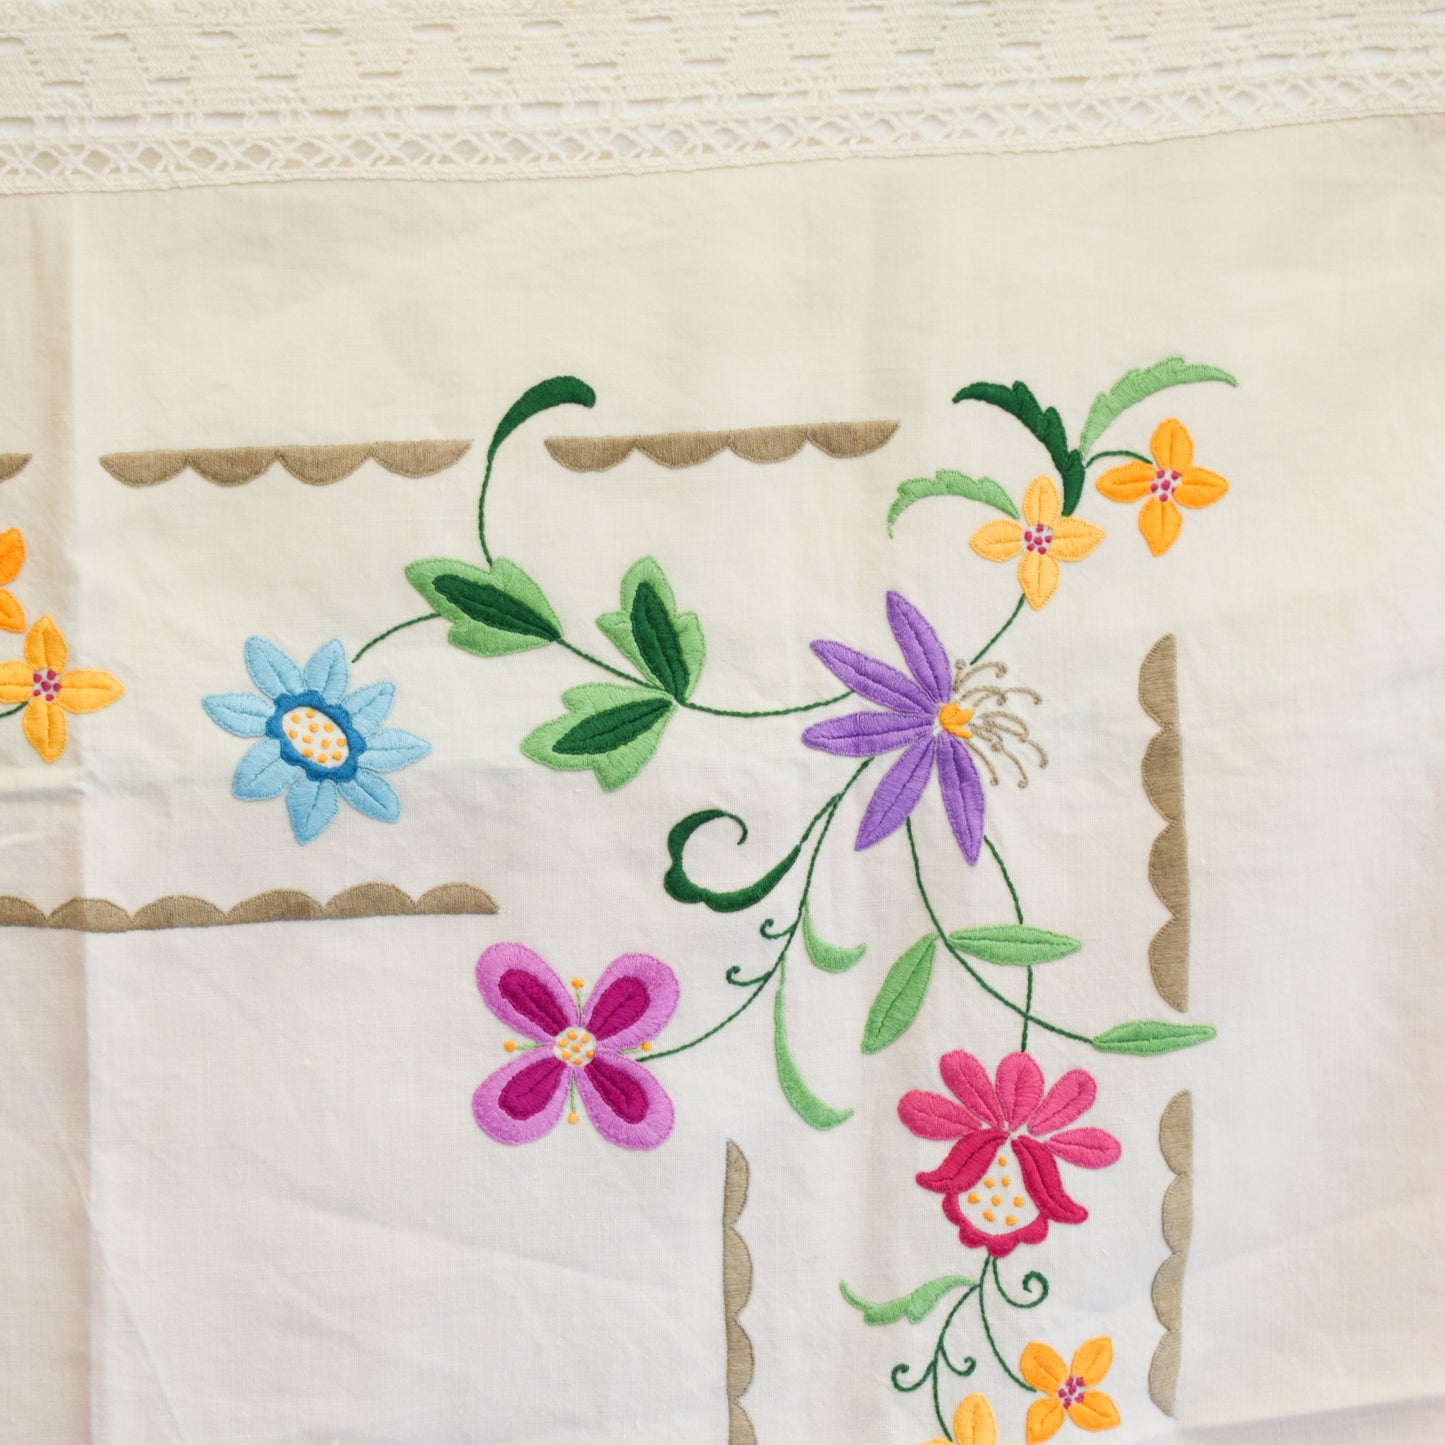 Vintage 1960s Embroidered Tablecloth - Flowers